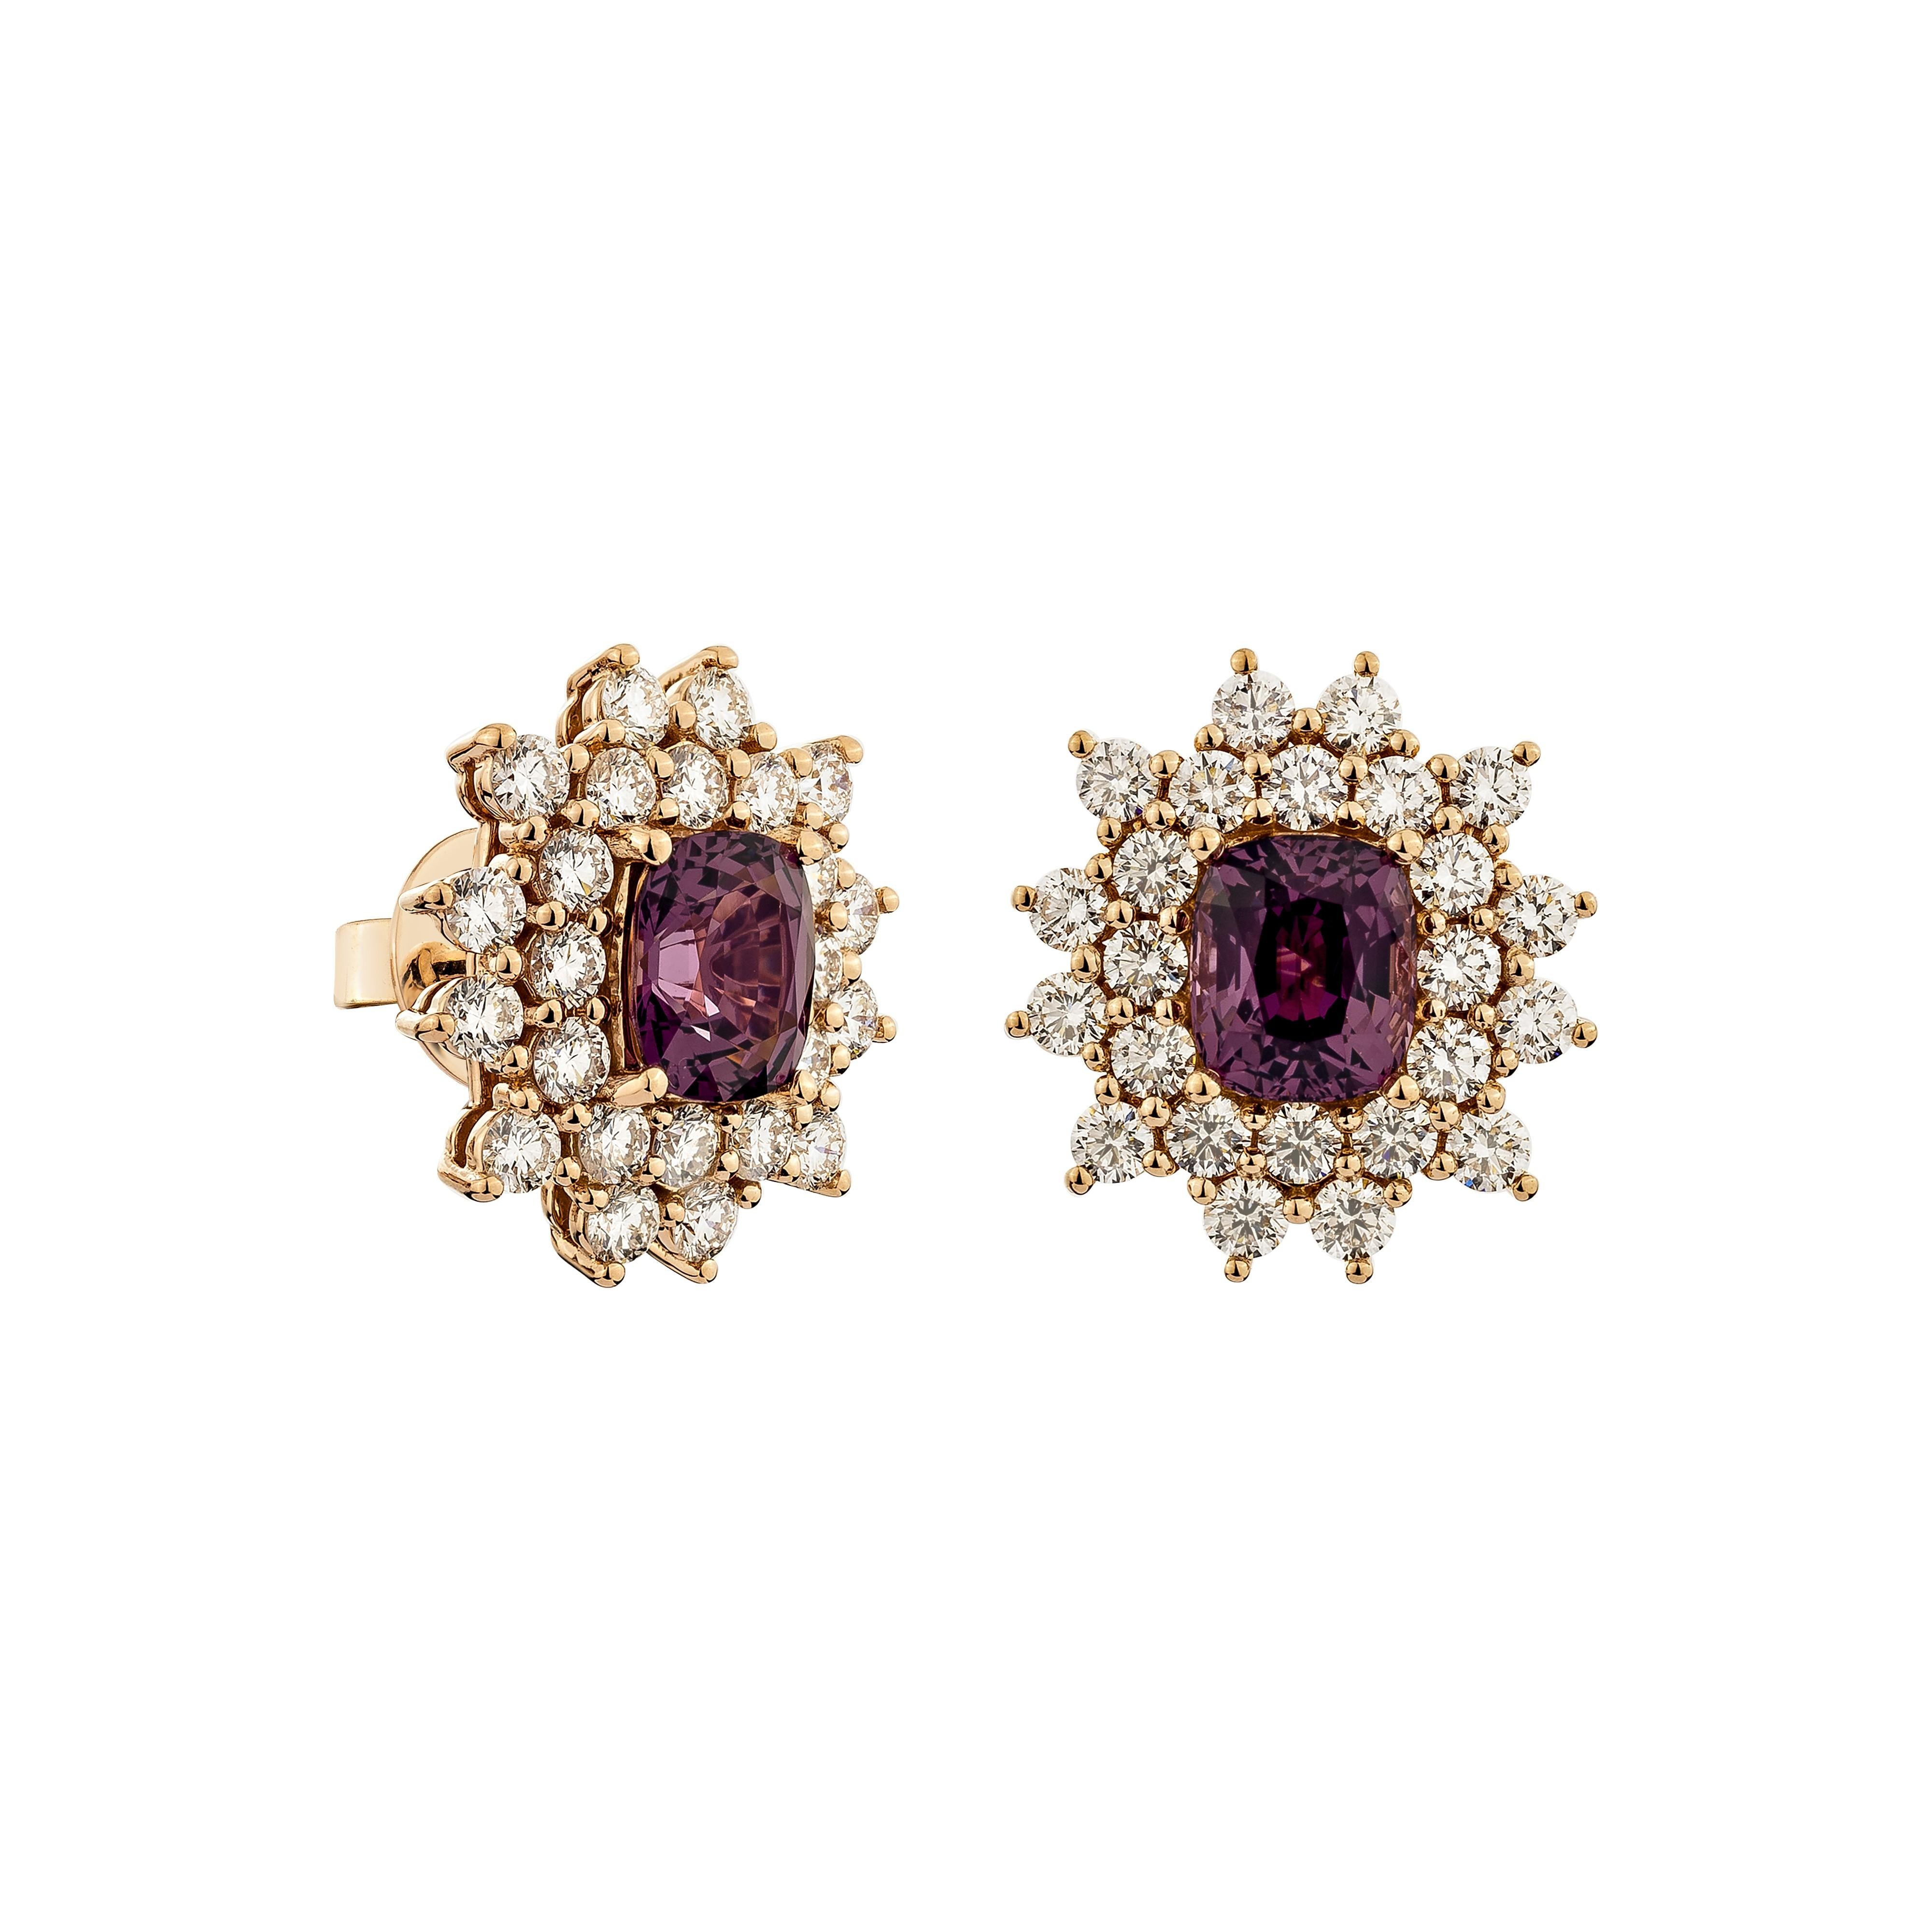 Light and easy to wear these earrings showcase cushion cut spinel accented with diamonds. These earrings are dainty yet have a great pop of color from the vibrant gems.

Spinel stud Earrings in 18Karat Rose Gold with White Diamond.

Spinel: 3.82